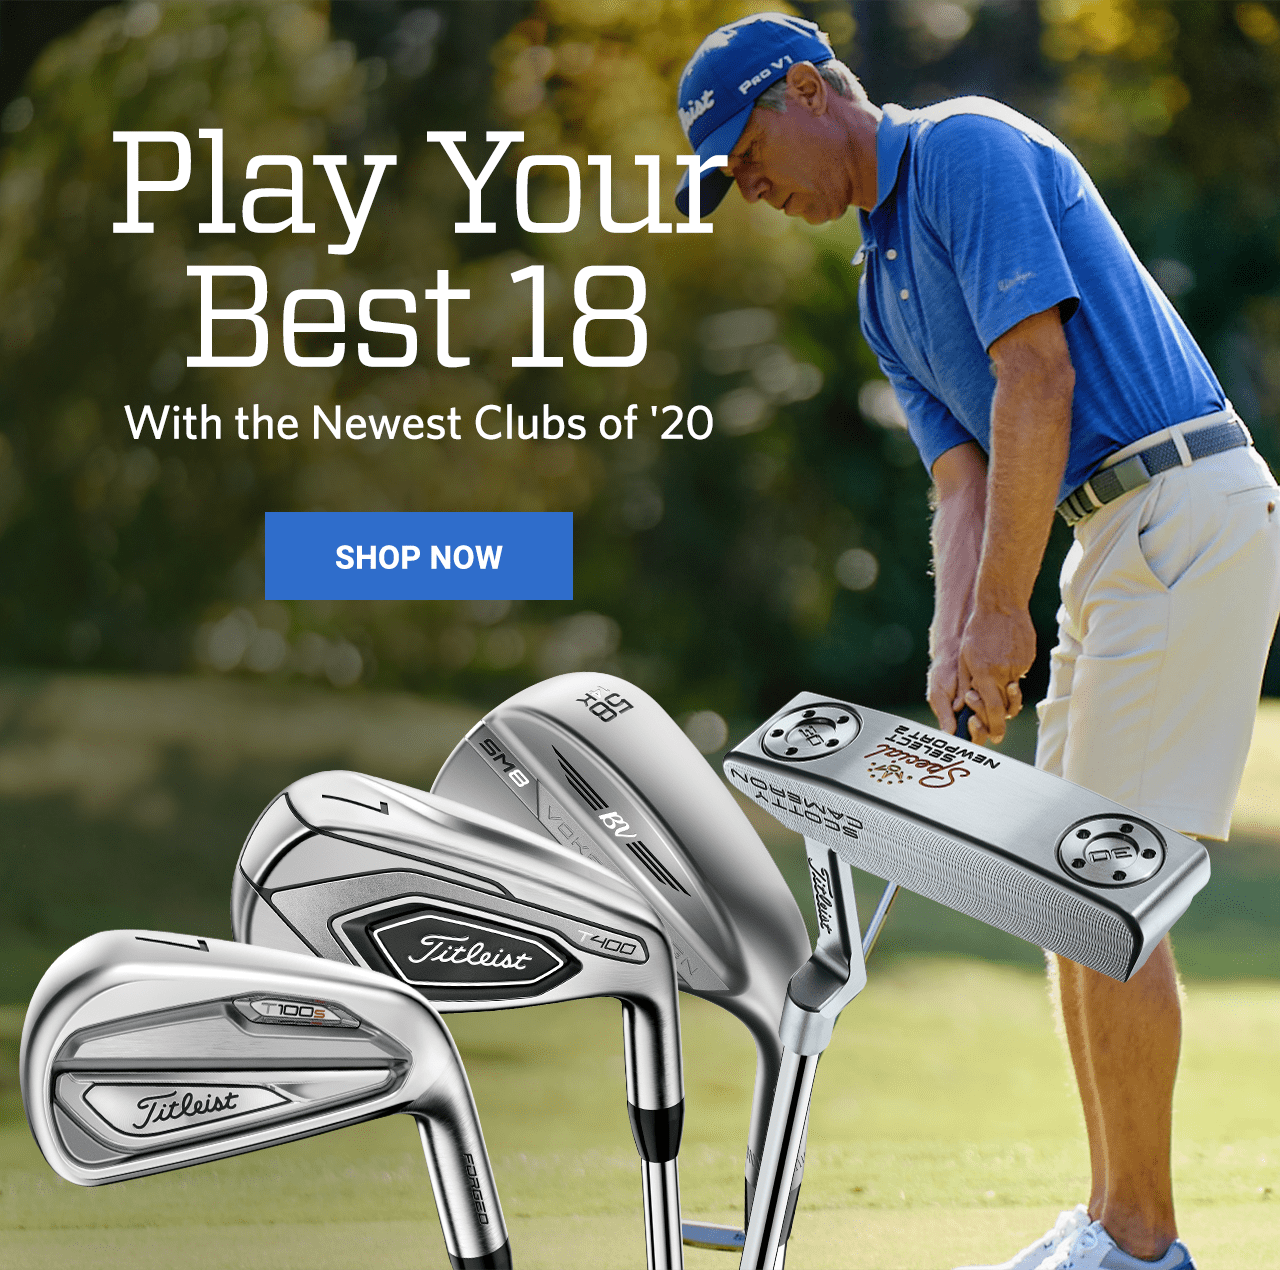 Play your best 18 with the newest clubs of 2020. Shop now.